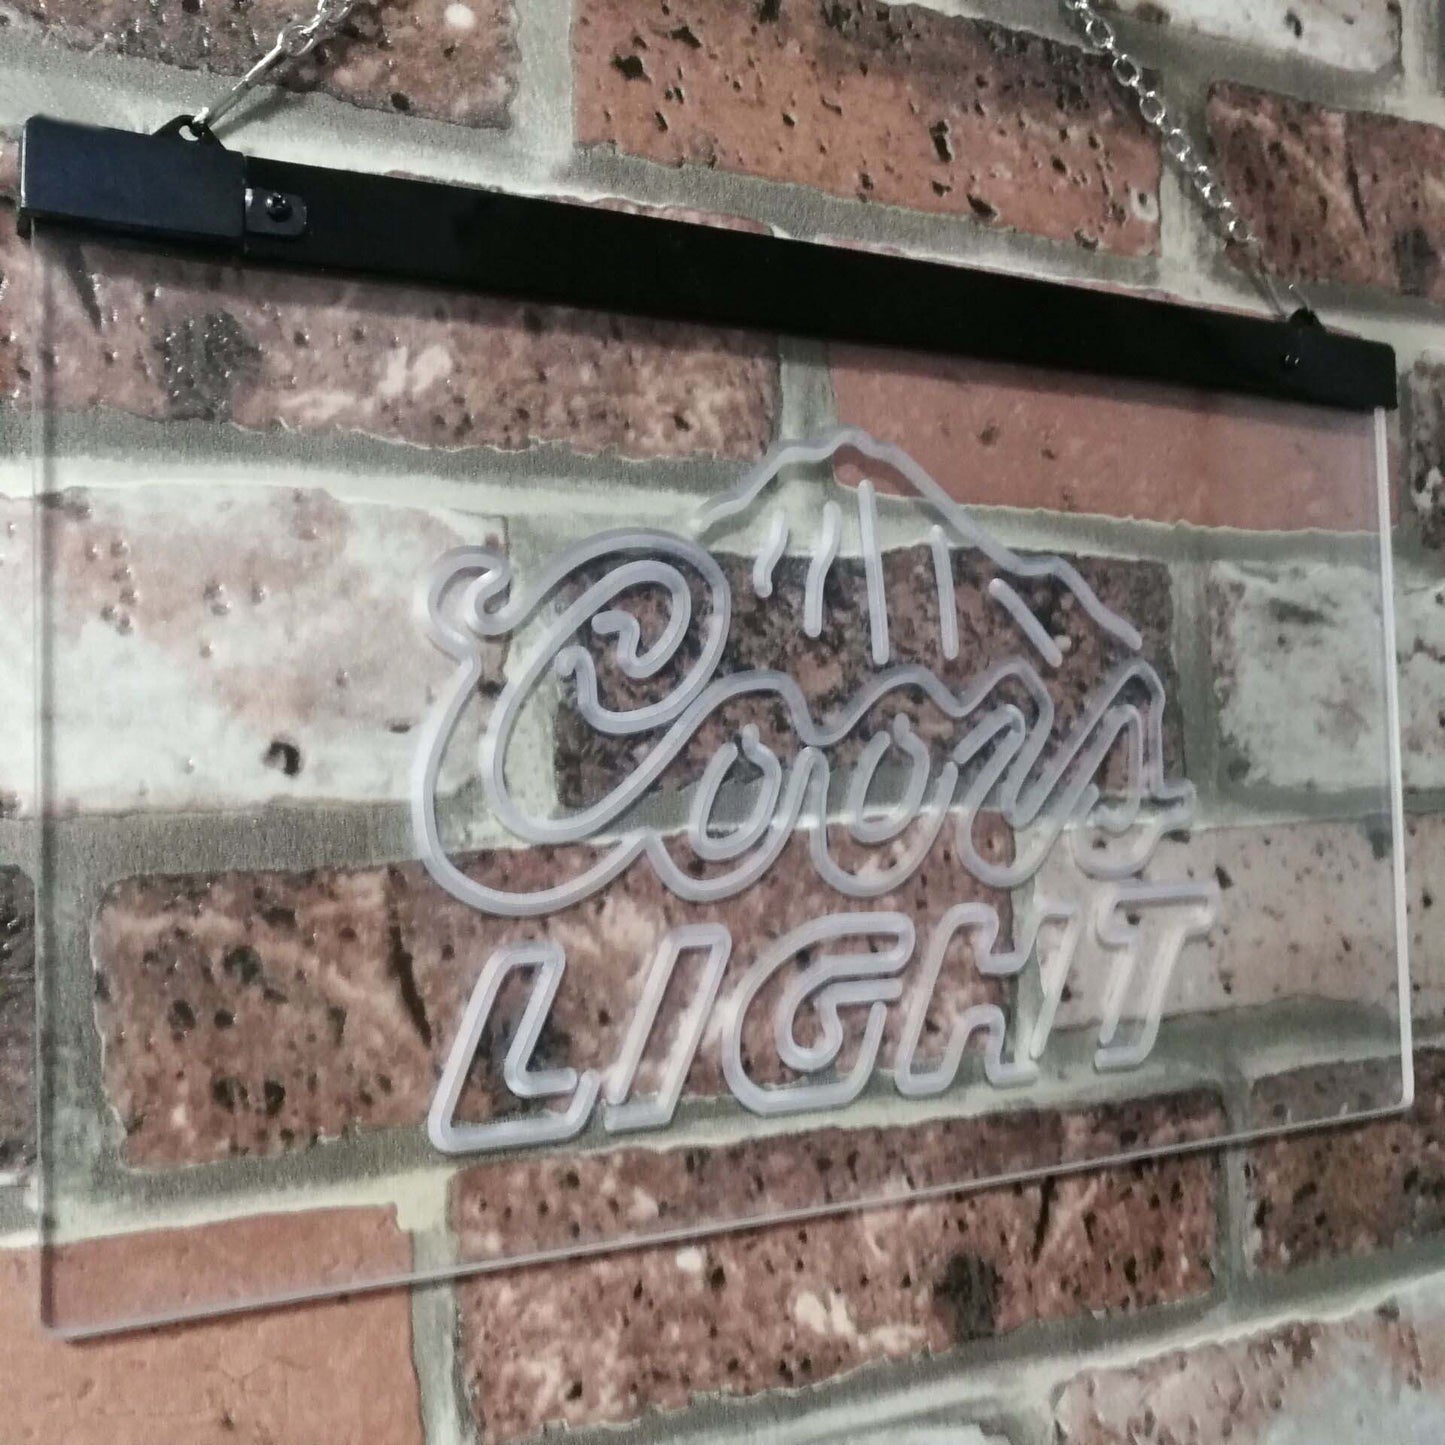 Coors Light Mountain  Bar Decoration Gift Dual Color Led Neon Light Signs st6-a2012 by Woody Signs Co. - Handmade Crafted Unique Wooden Creative